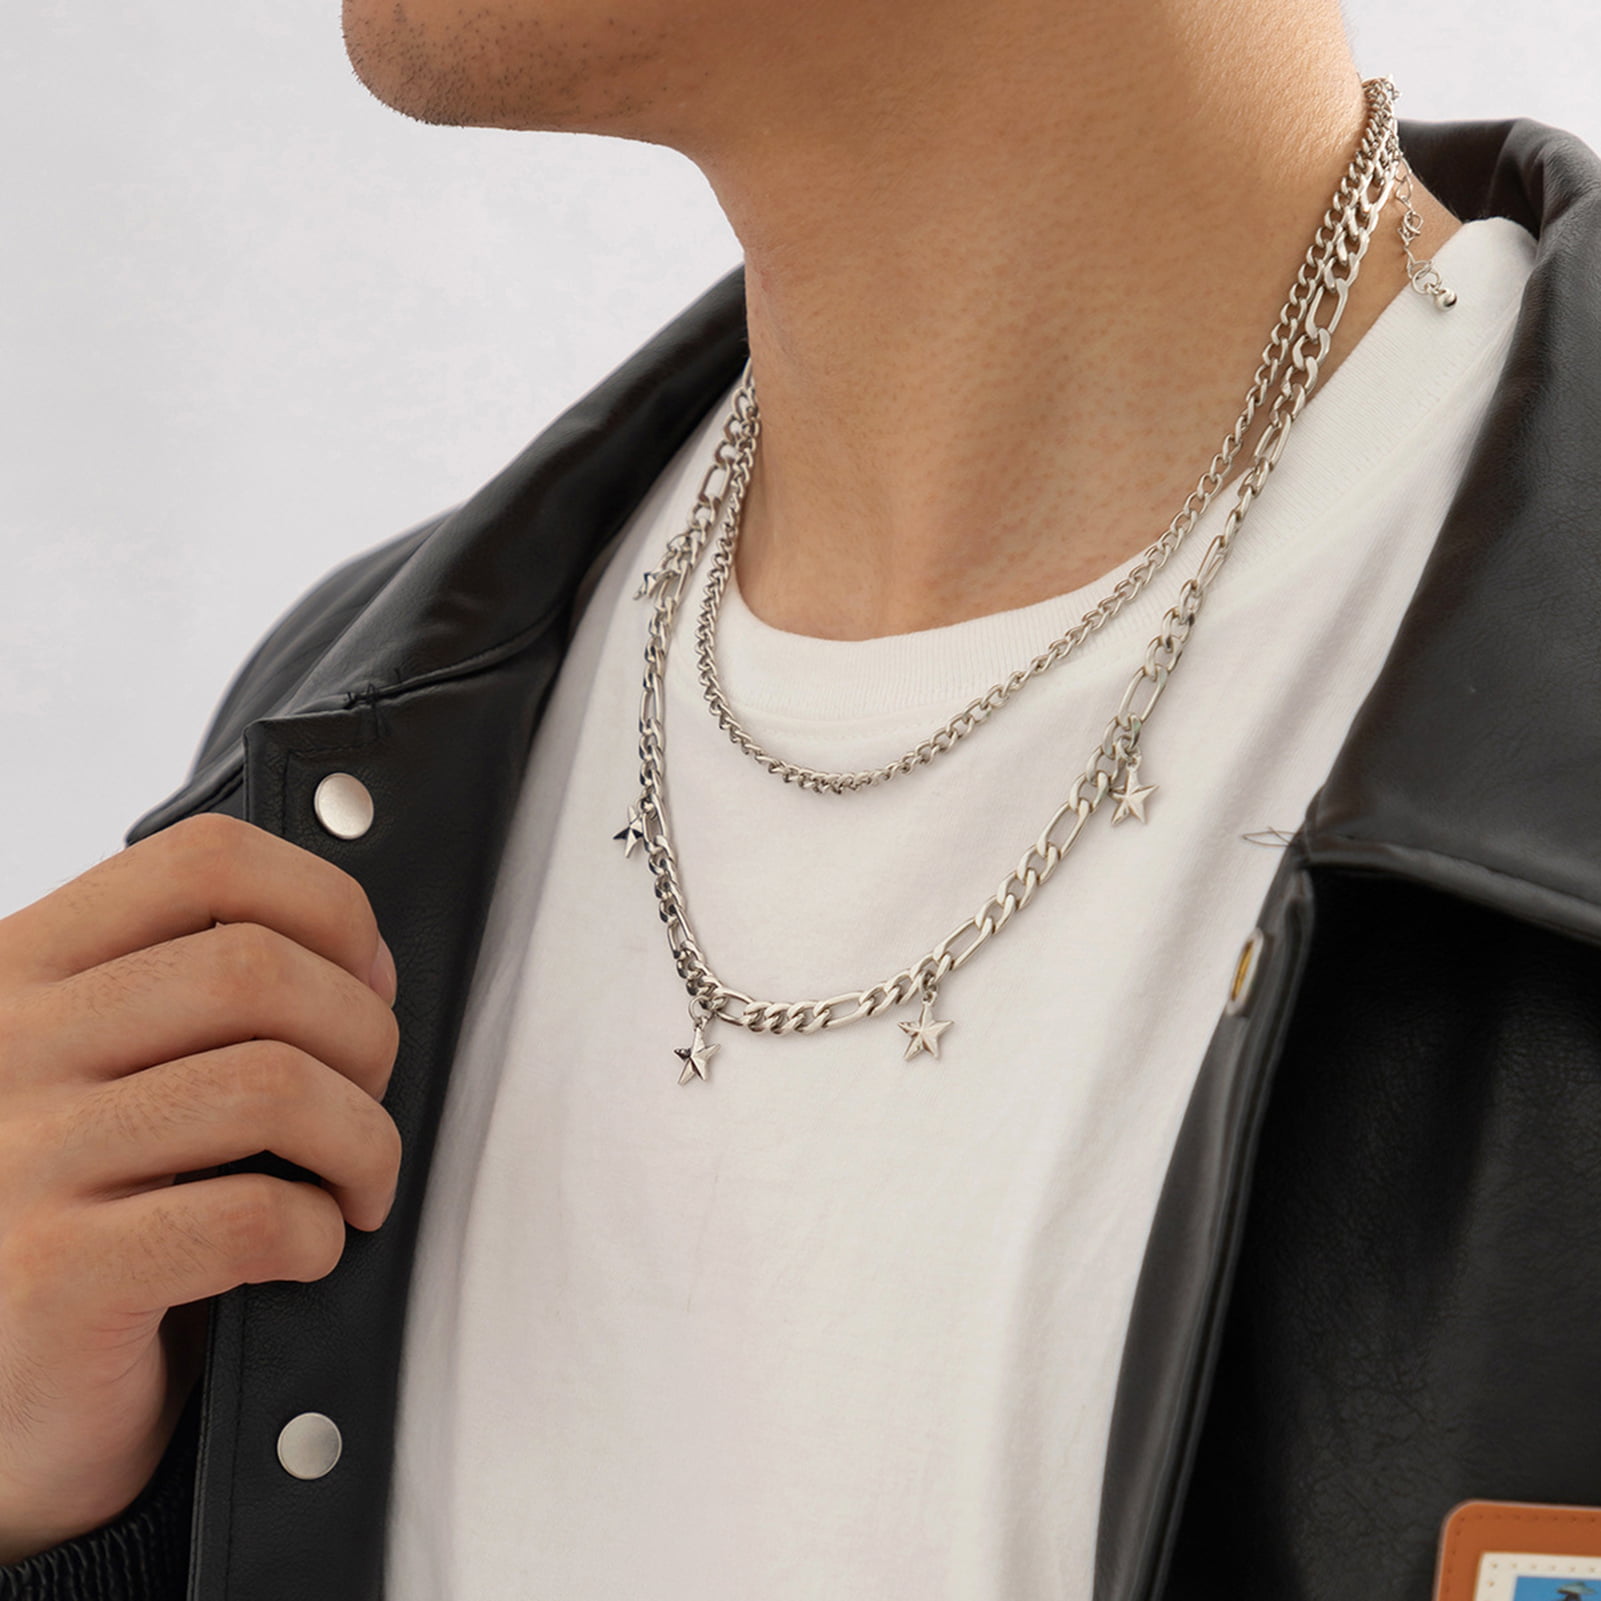 Buy Fashion Frill Stylish Golden Chain For Men Stainless Steel Rice Silver  Double Coated Necklace Gold Chain For Men Boys Mens Jewellery Chains - 24  Inches (Gold) at Amazon.in